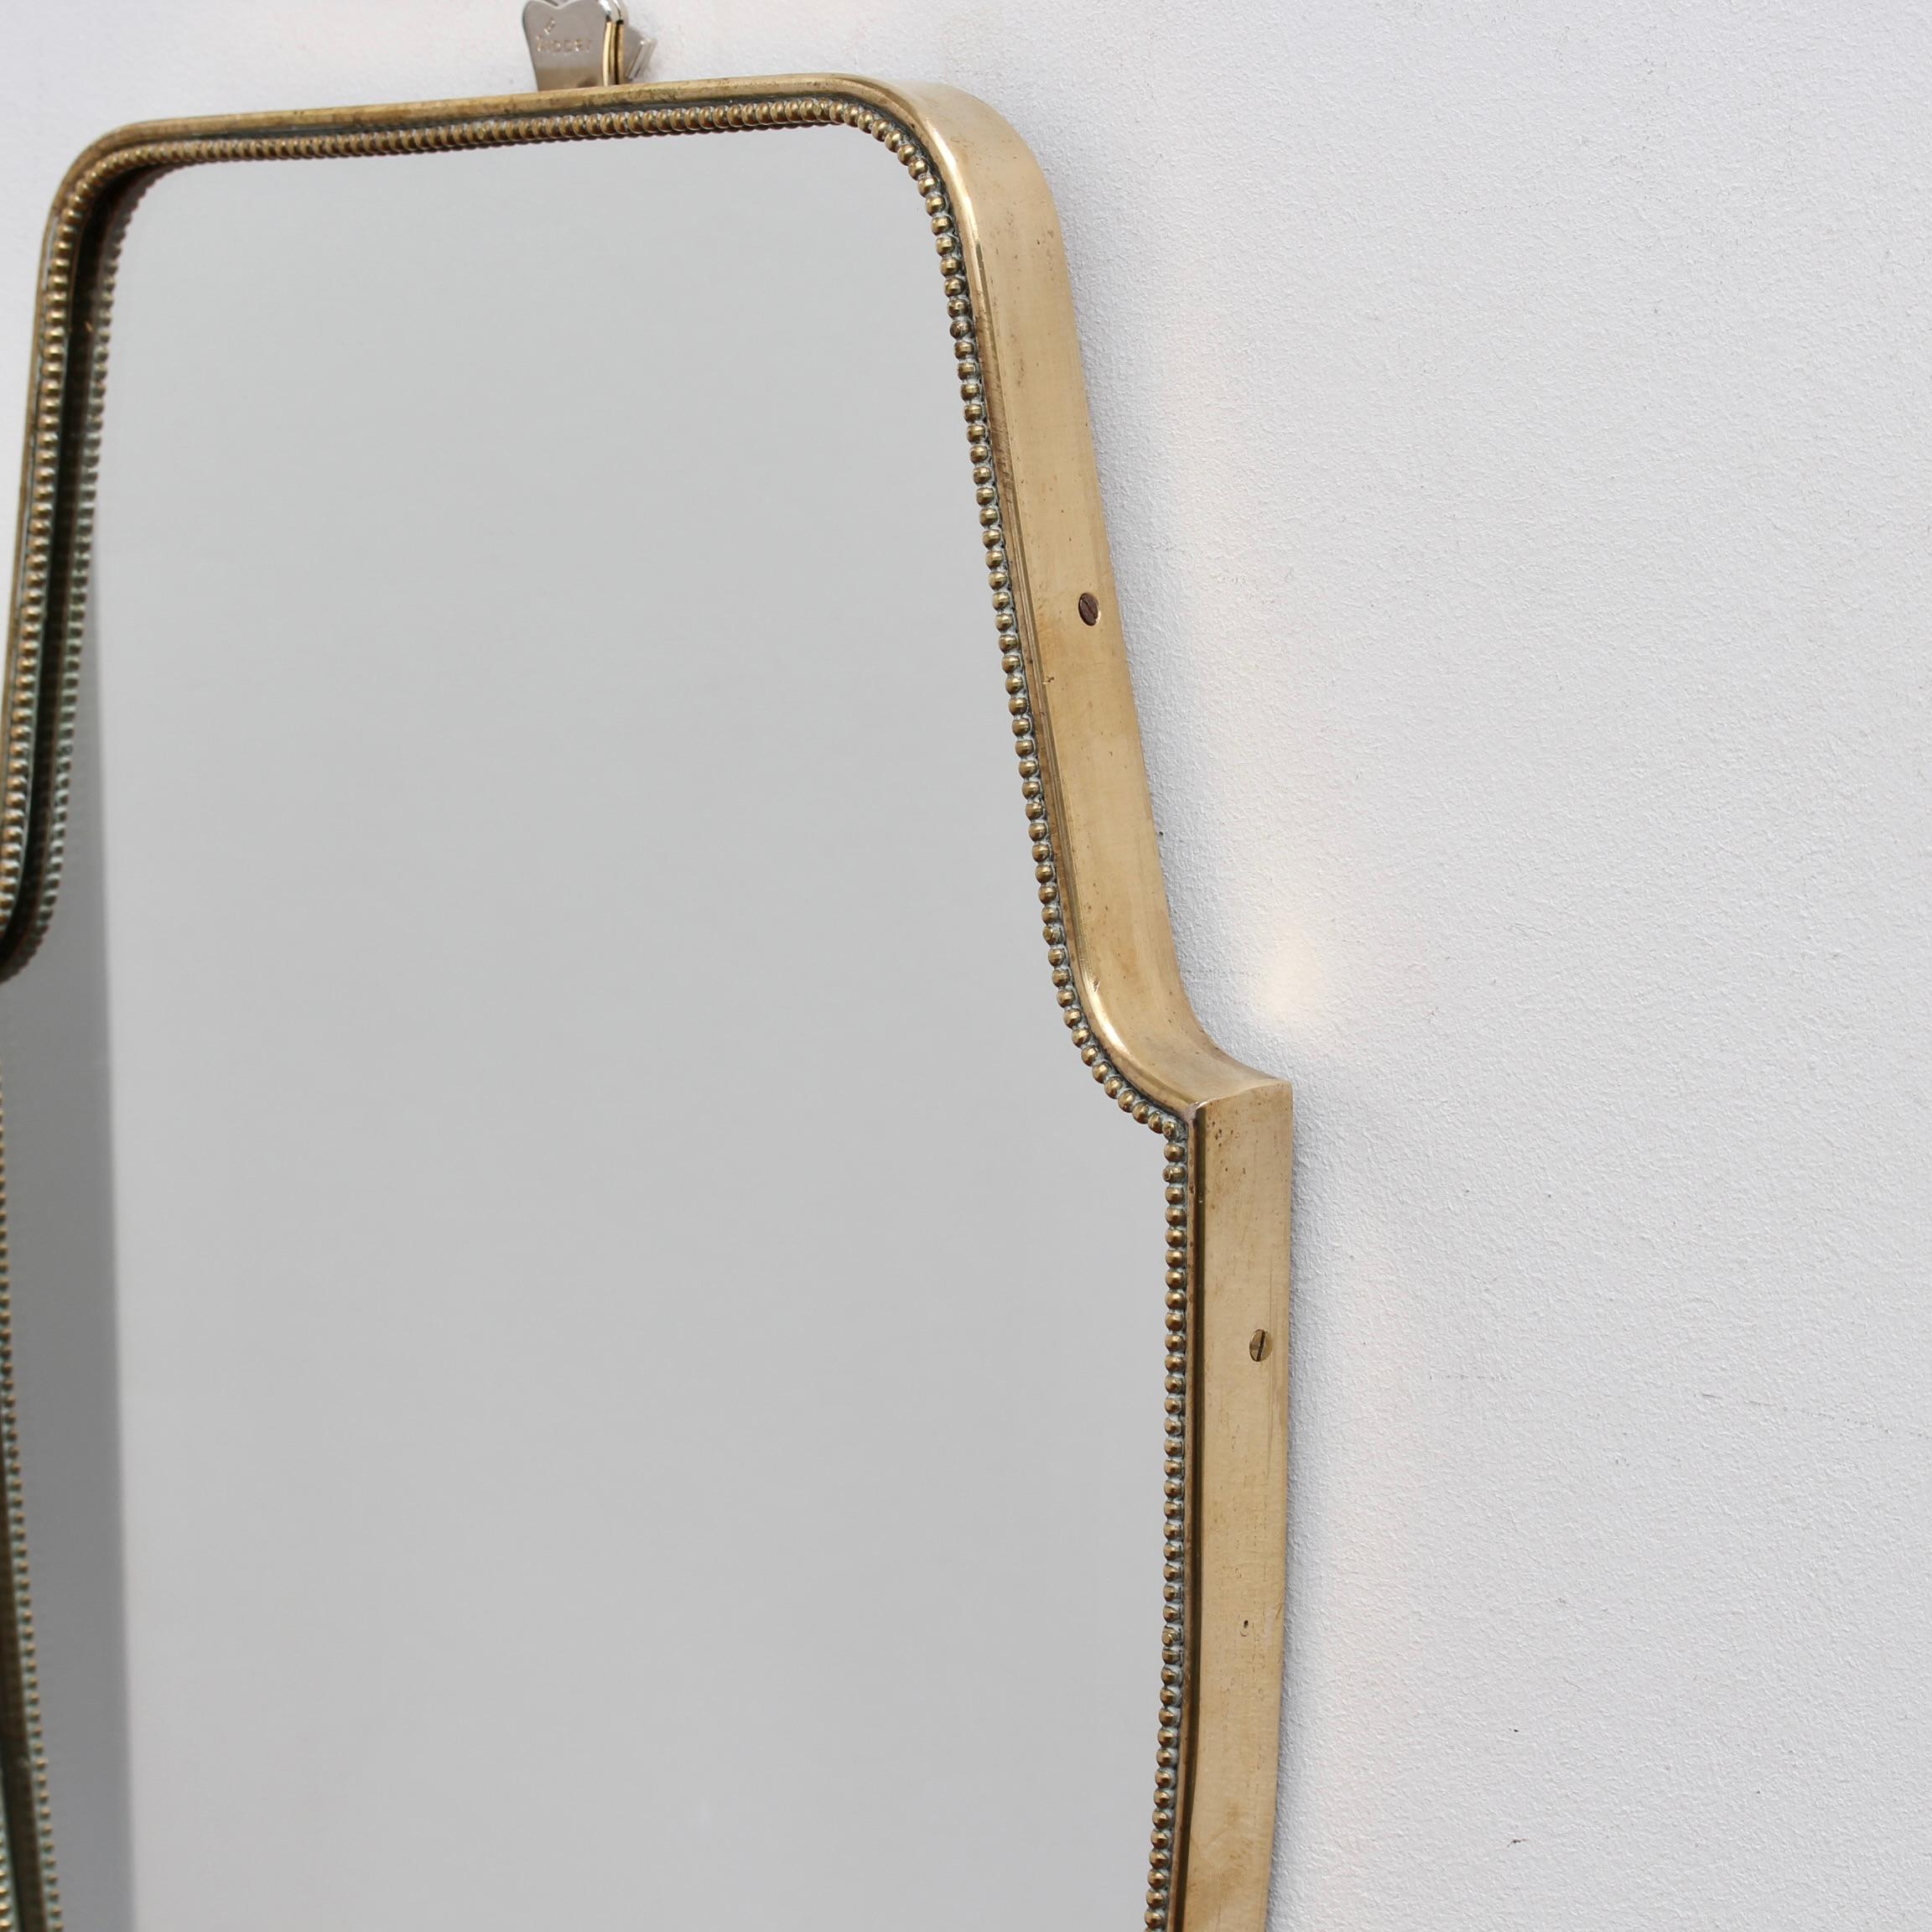 Vintage Italian Wall Mirror with Brass Frame and Beading, 'circa 1950s' 3